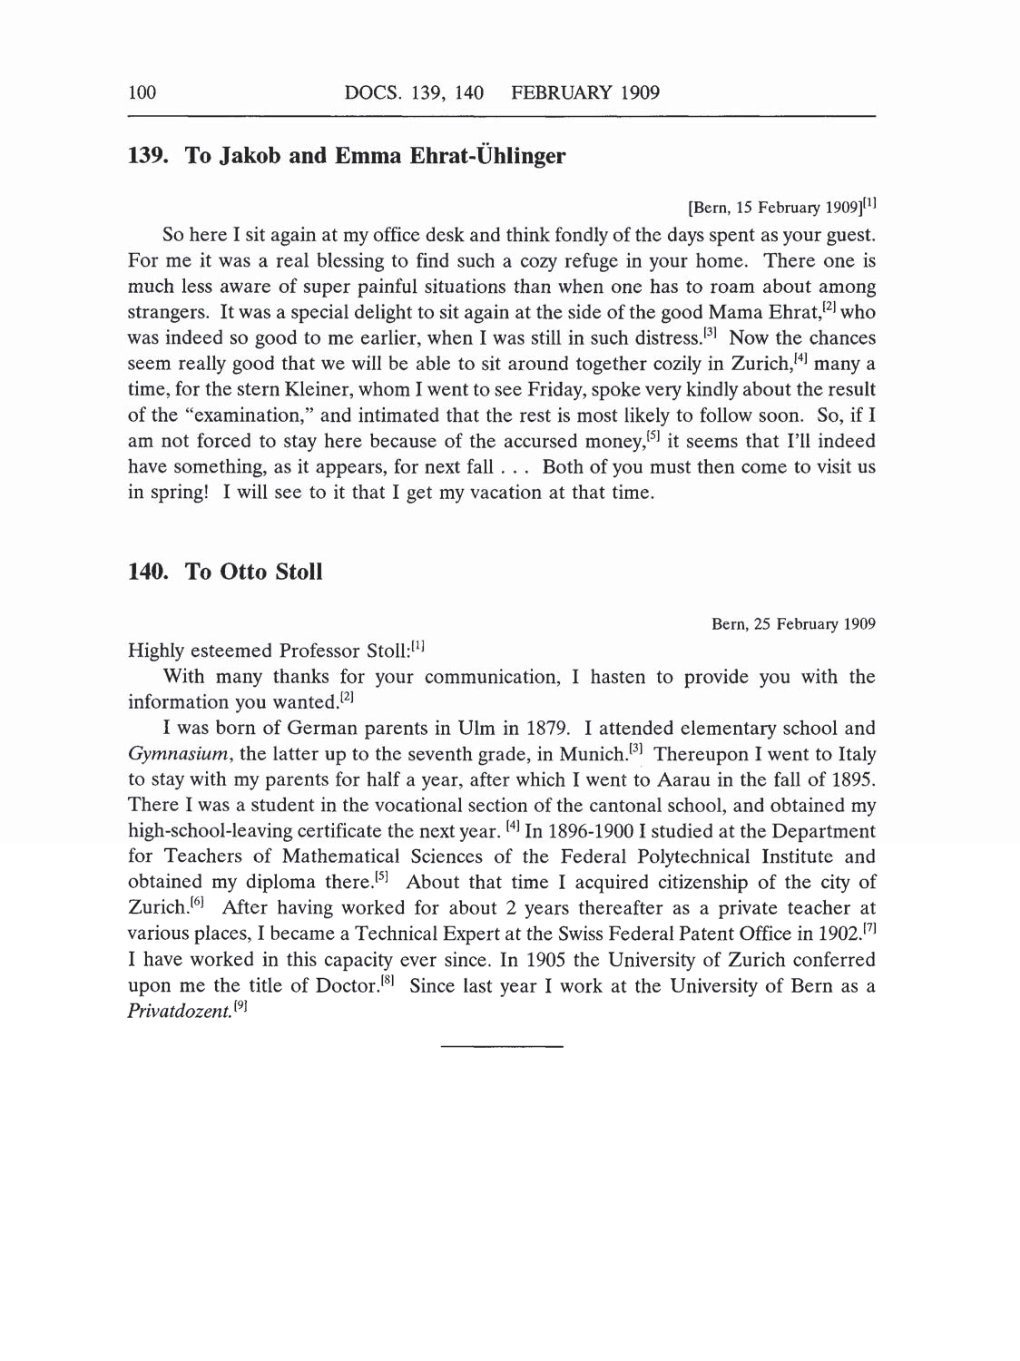 Volume 5: The Swiss Years: Correspondence, 1902-1914 (English translation supplement) page 100